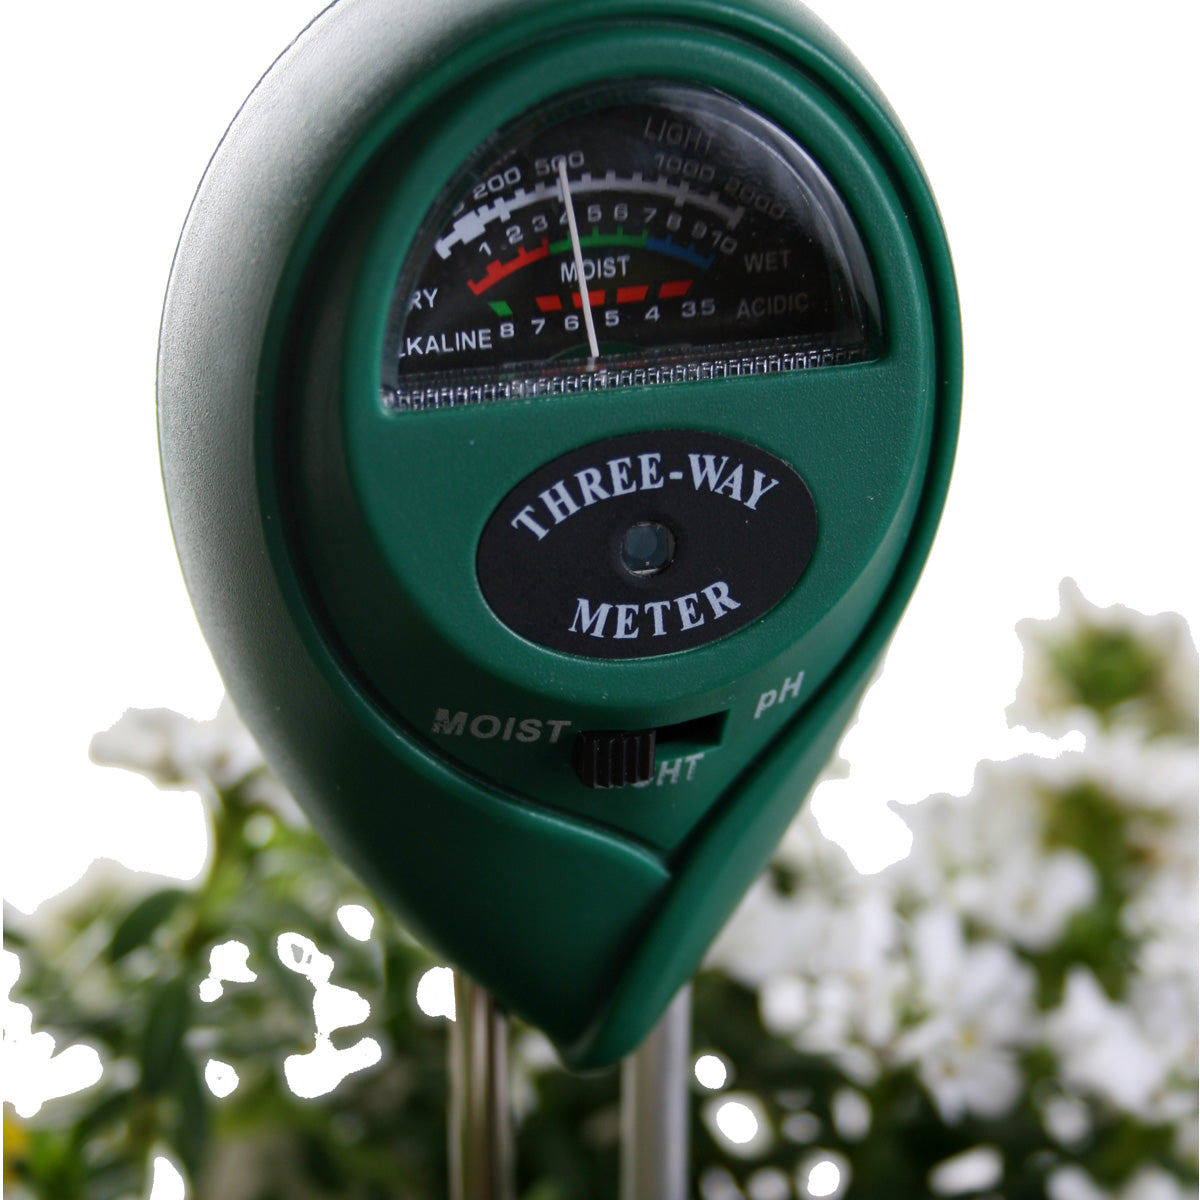 Product Secondary Image:Active Air 3 Way Soil Meter